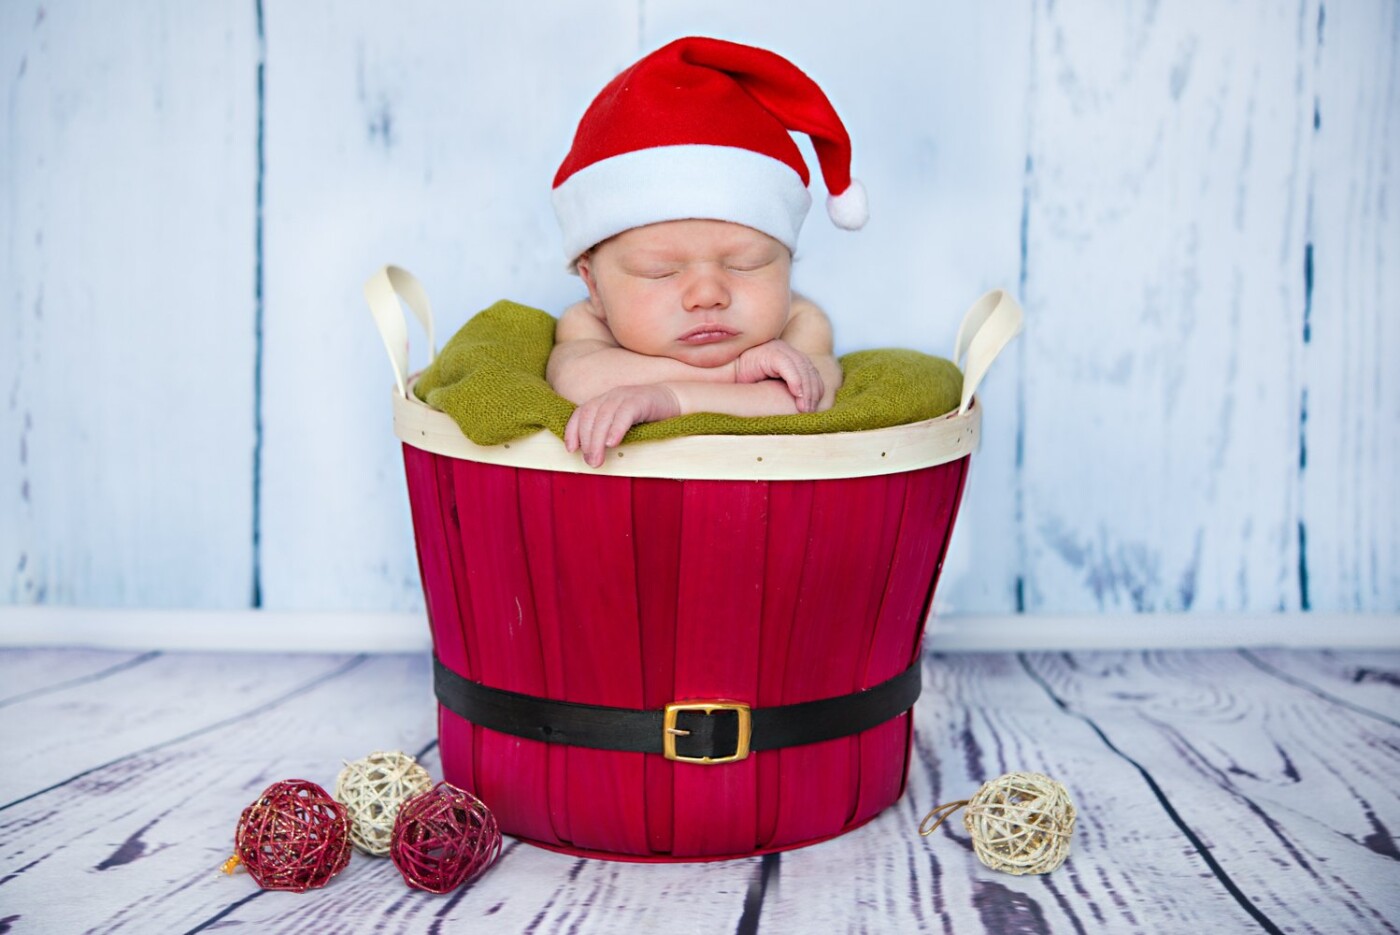 Ho!Ho!Ho! Here comes the youngest Santa. This sweet baby boy arrived just like a Christmas present in the days running up to Christmas so I thought it's a perfect opportunity to create a Santa-themed photo that combines the magic of Christmas with all the cuteness a newborn brings. It's my favourite image from all the newborn sessions from 2016 and have been my Christmas greeting card this past festive season. 